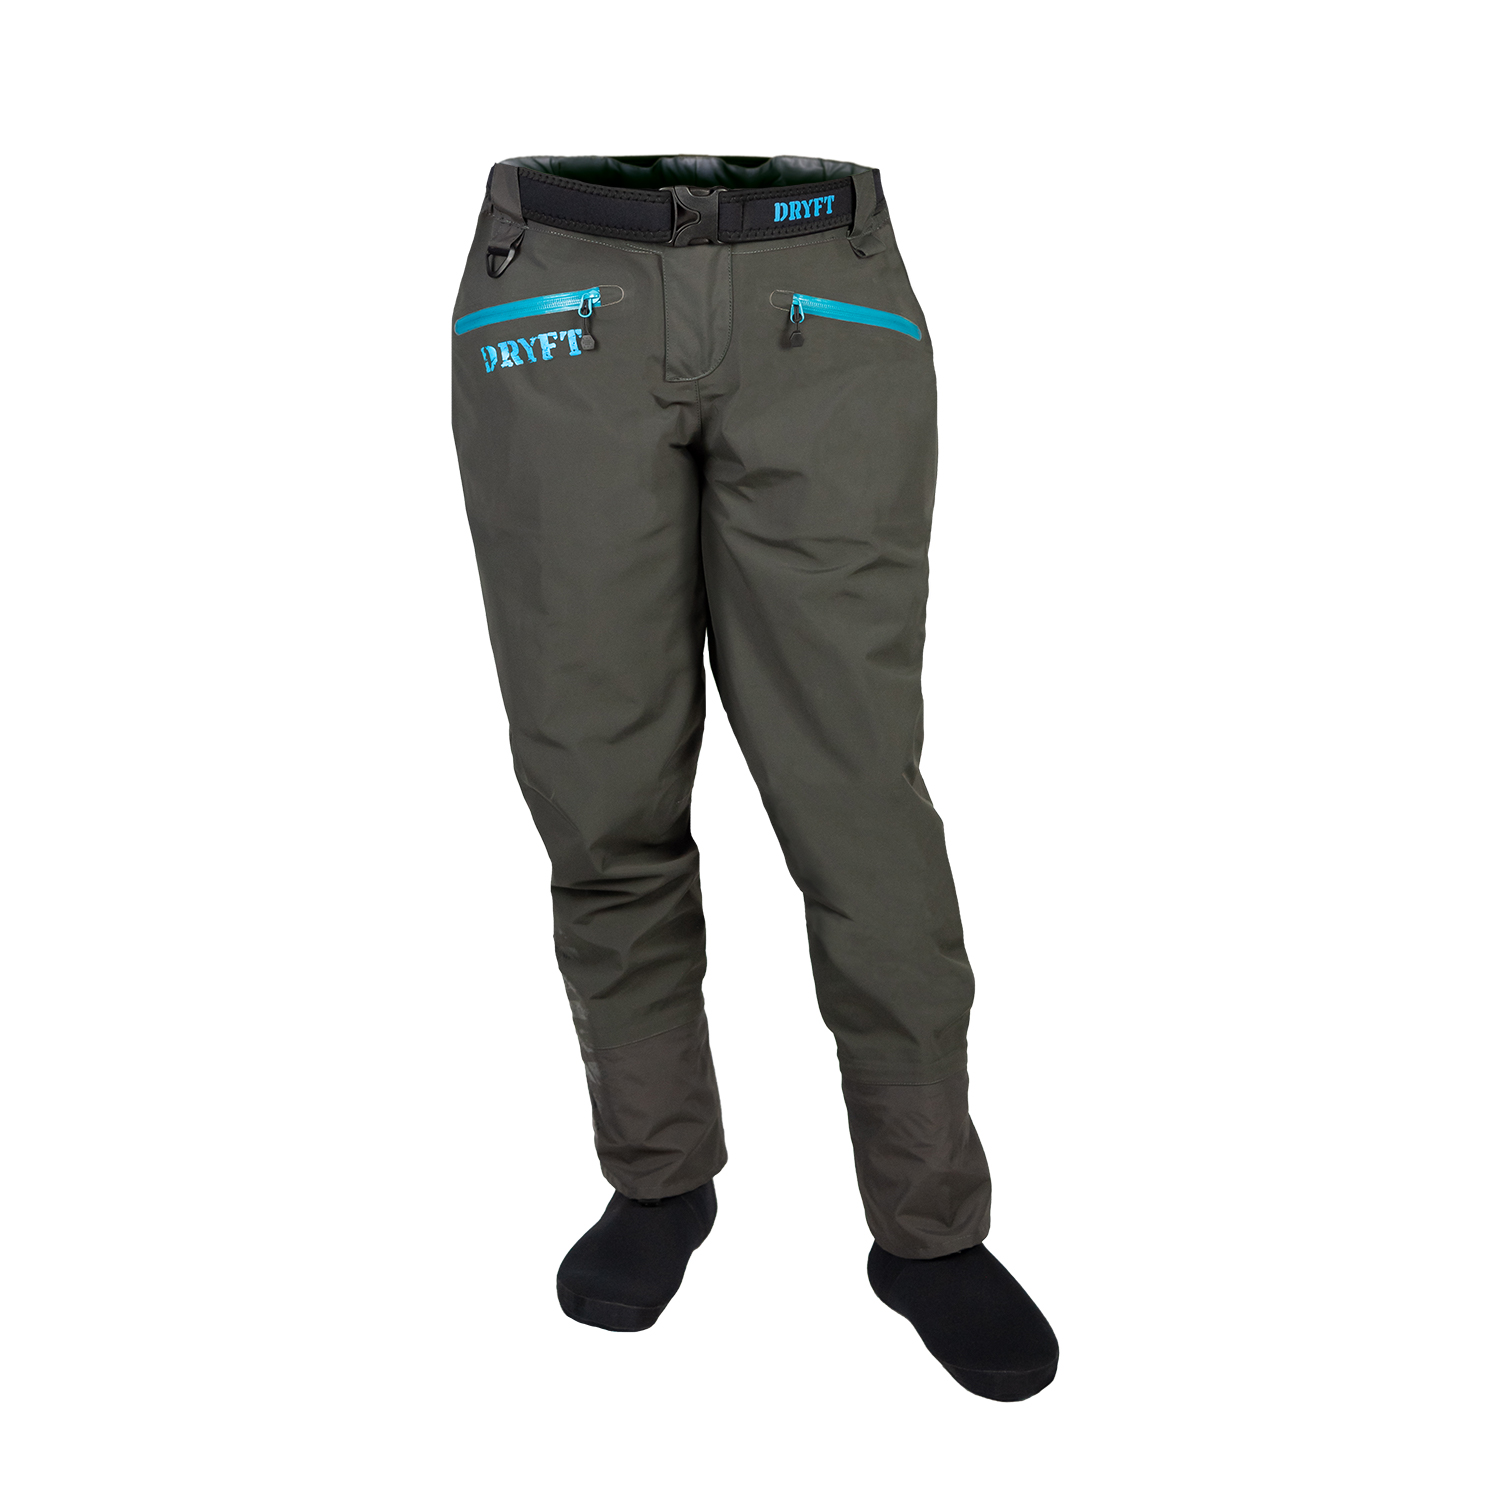 Session Women's Waist Waders - DRYFT™ Fishing Waders